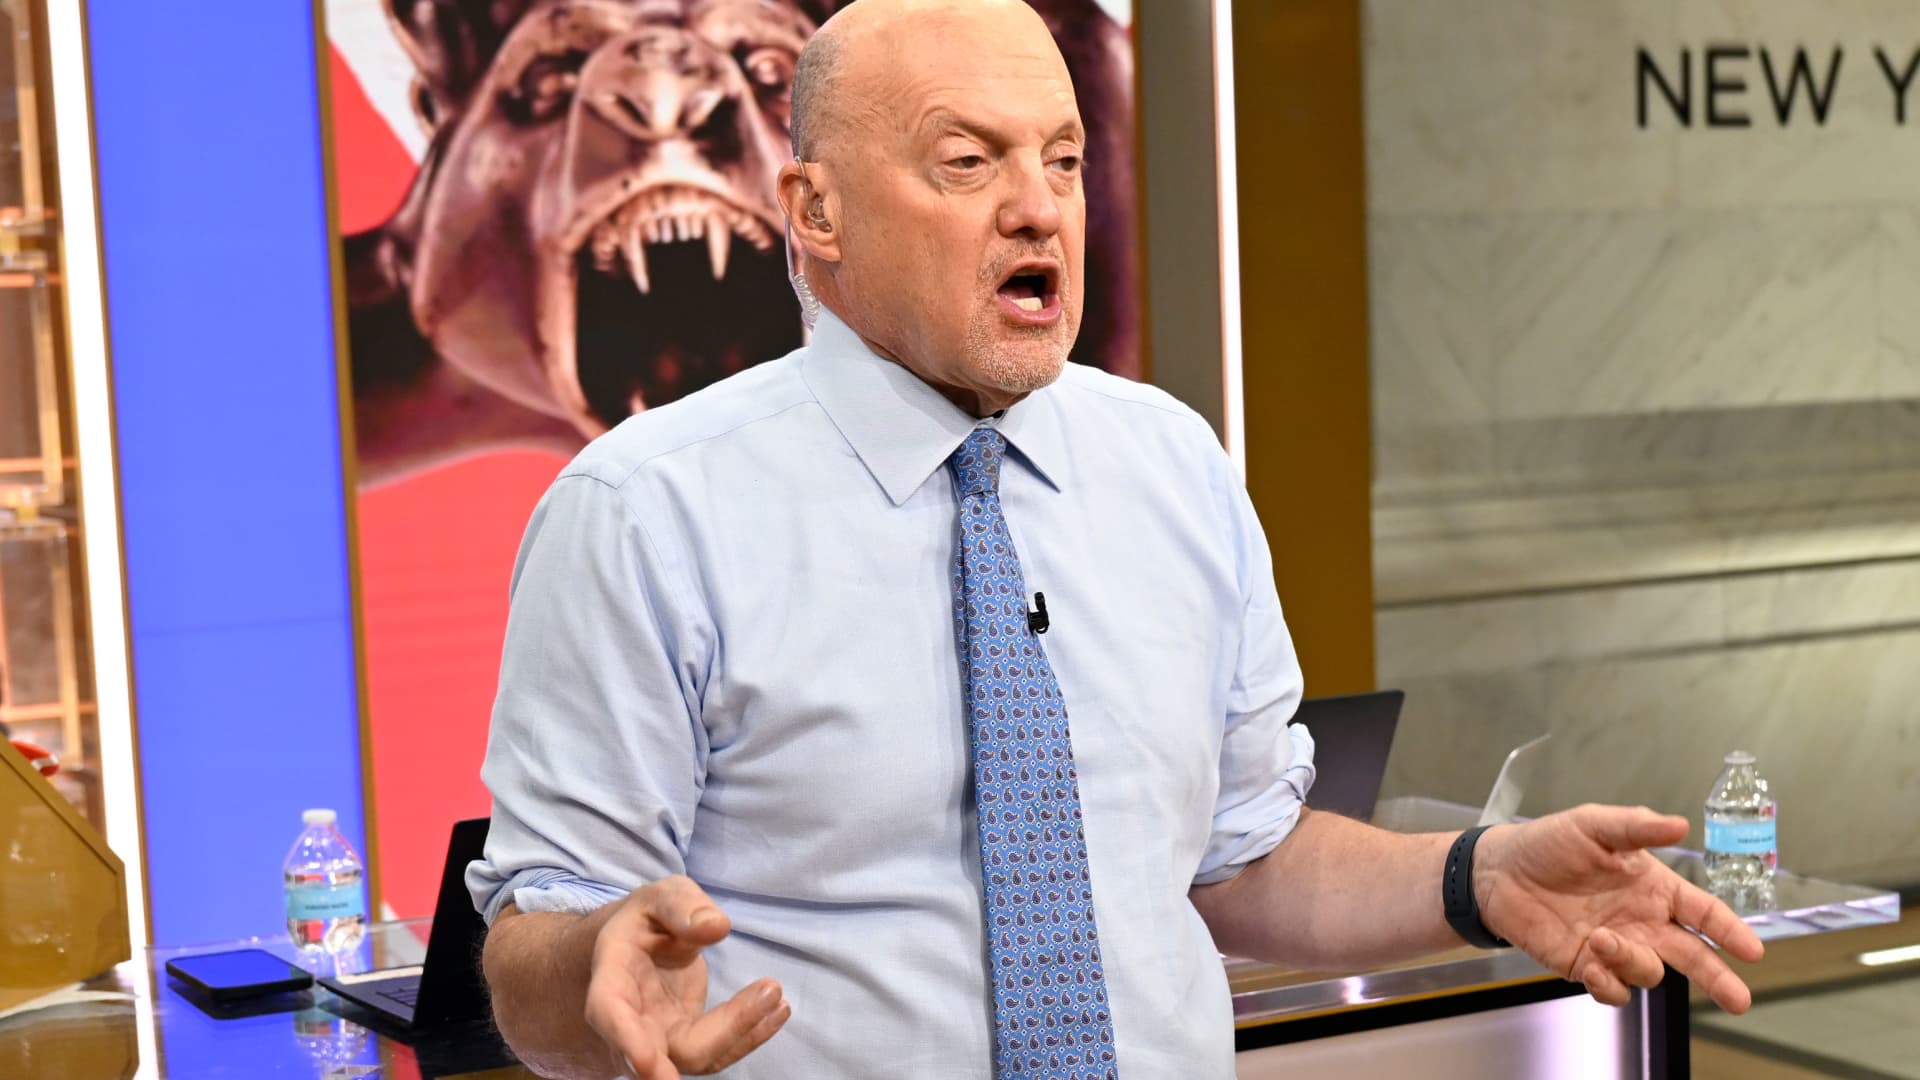 Here’s what Jim Cramer expects from key consumer earnings next week